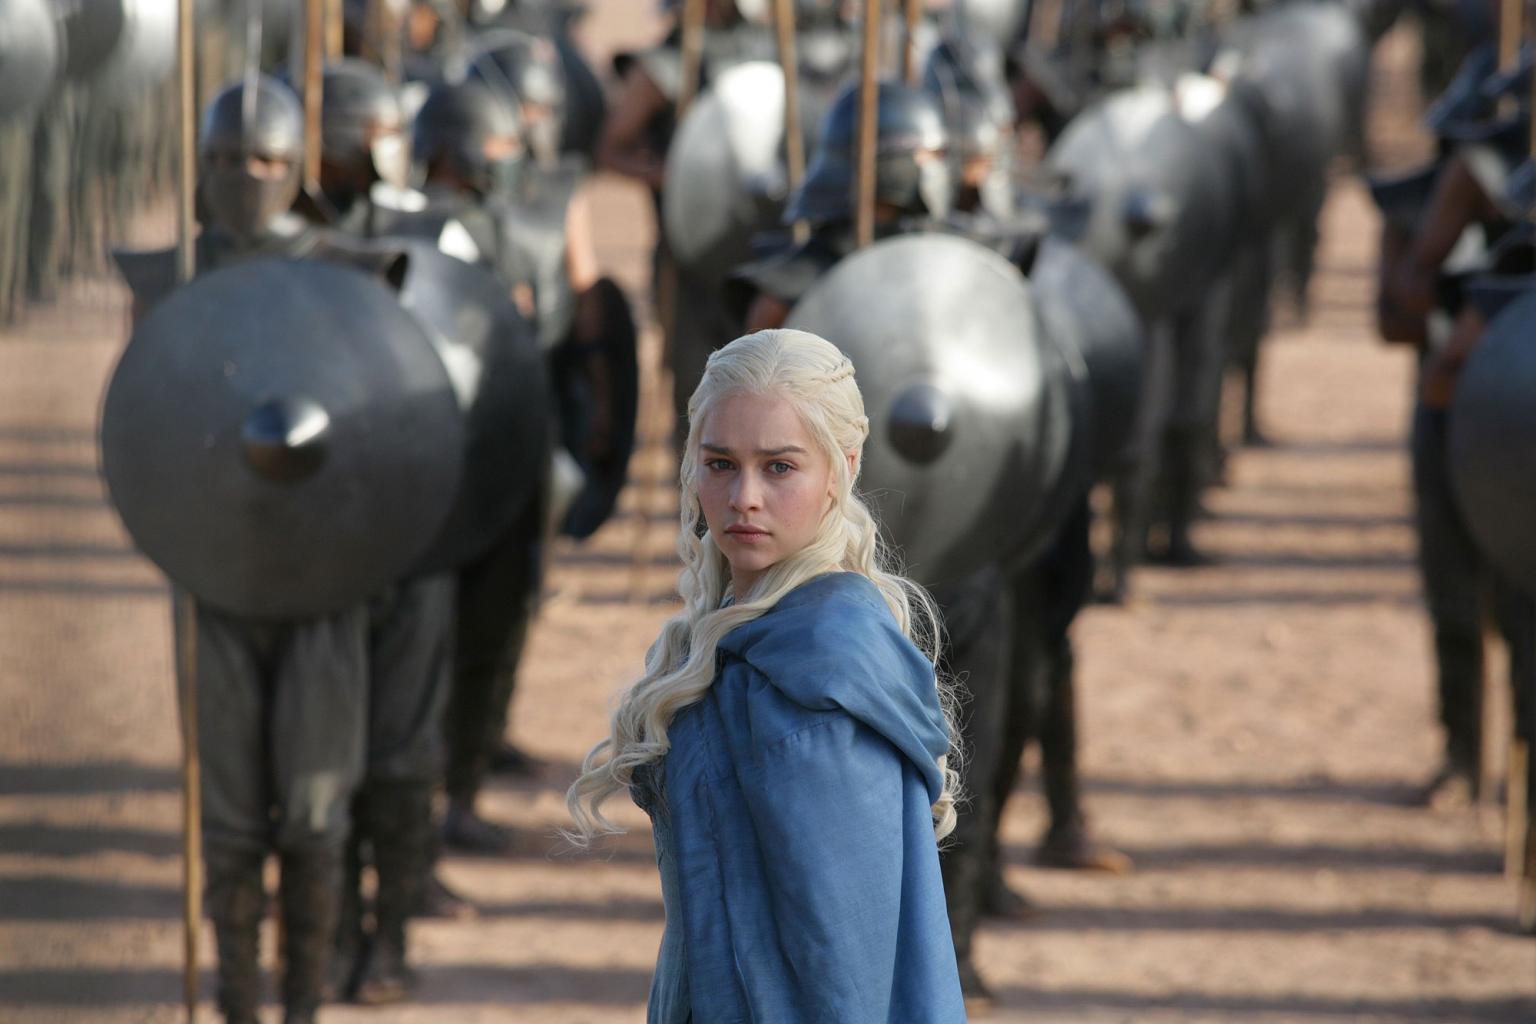 Game of Thrones Star Emilia Clarke Says Sexism in Hollywood Is Like 'Dealing with Racism'